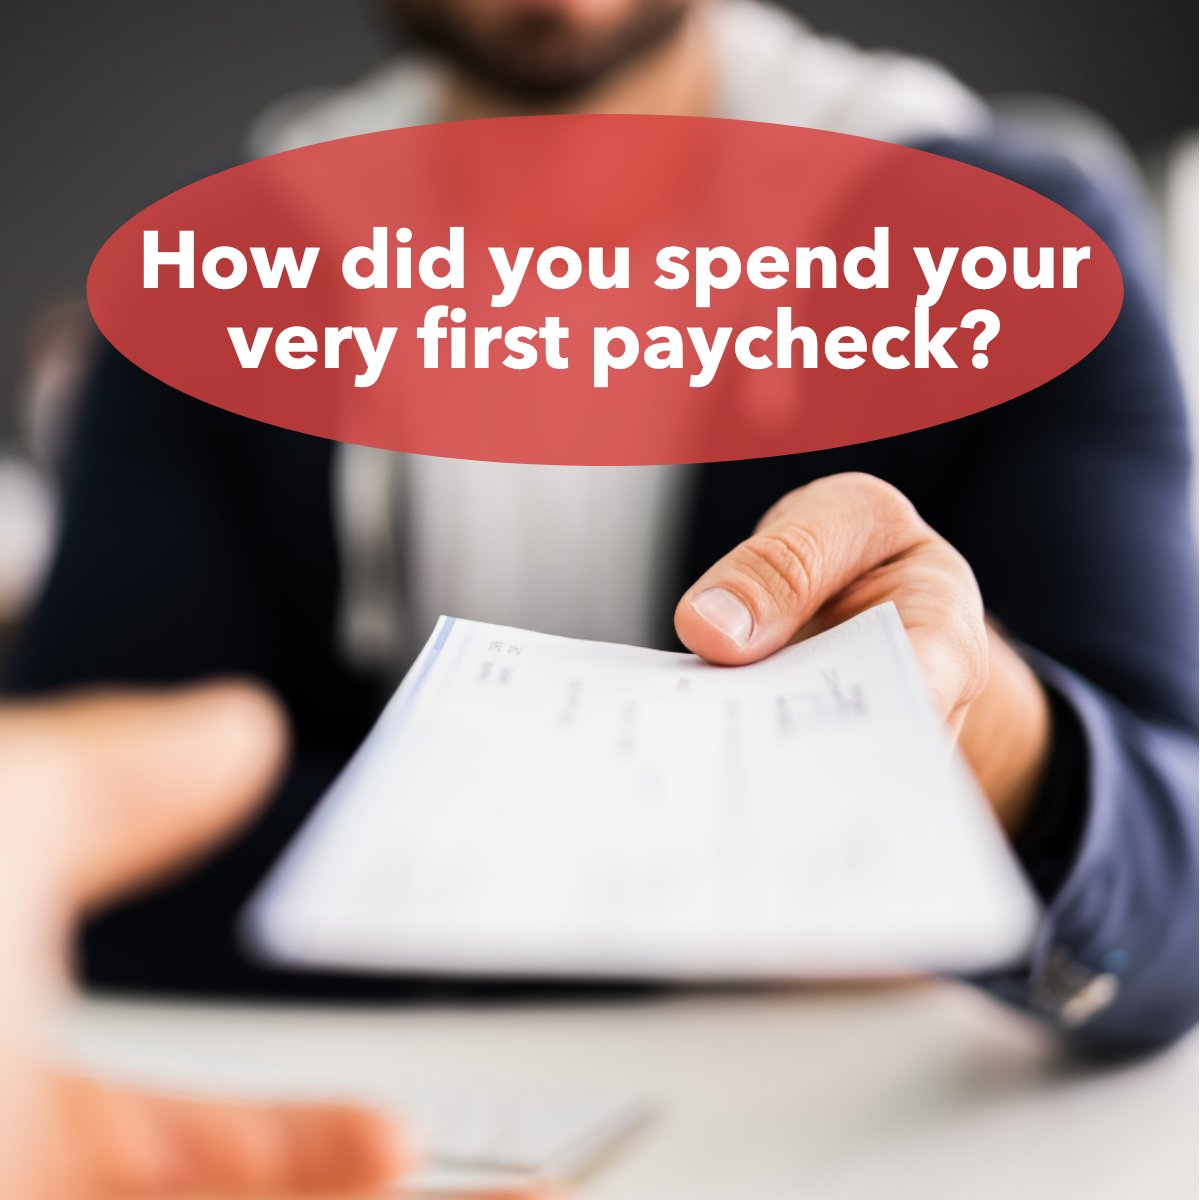 Most likely invested in yourself. 💖

If not, how did you spend your very first paycheck? 🤔

#financialindependence #moneymatters #budgeting101 #paycheck #paychecktopaycheck
 #Gastonia #GastonHomeOfTheWeek #HanksRealtyGroup #HRG #RealEstateExperts #GastonRealEstate